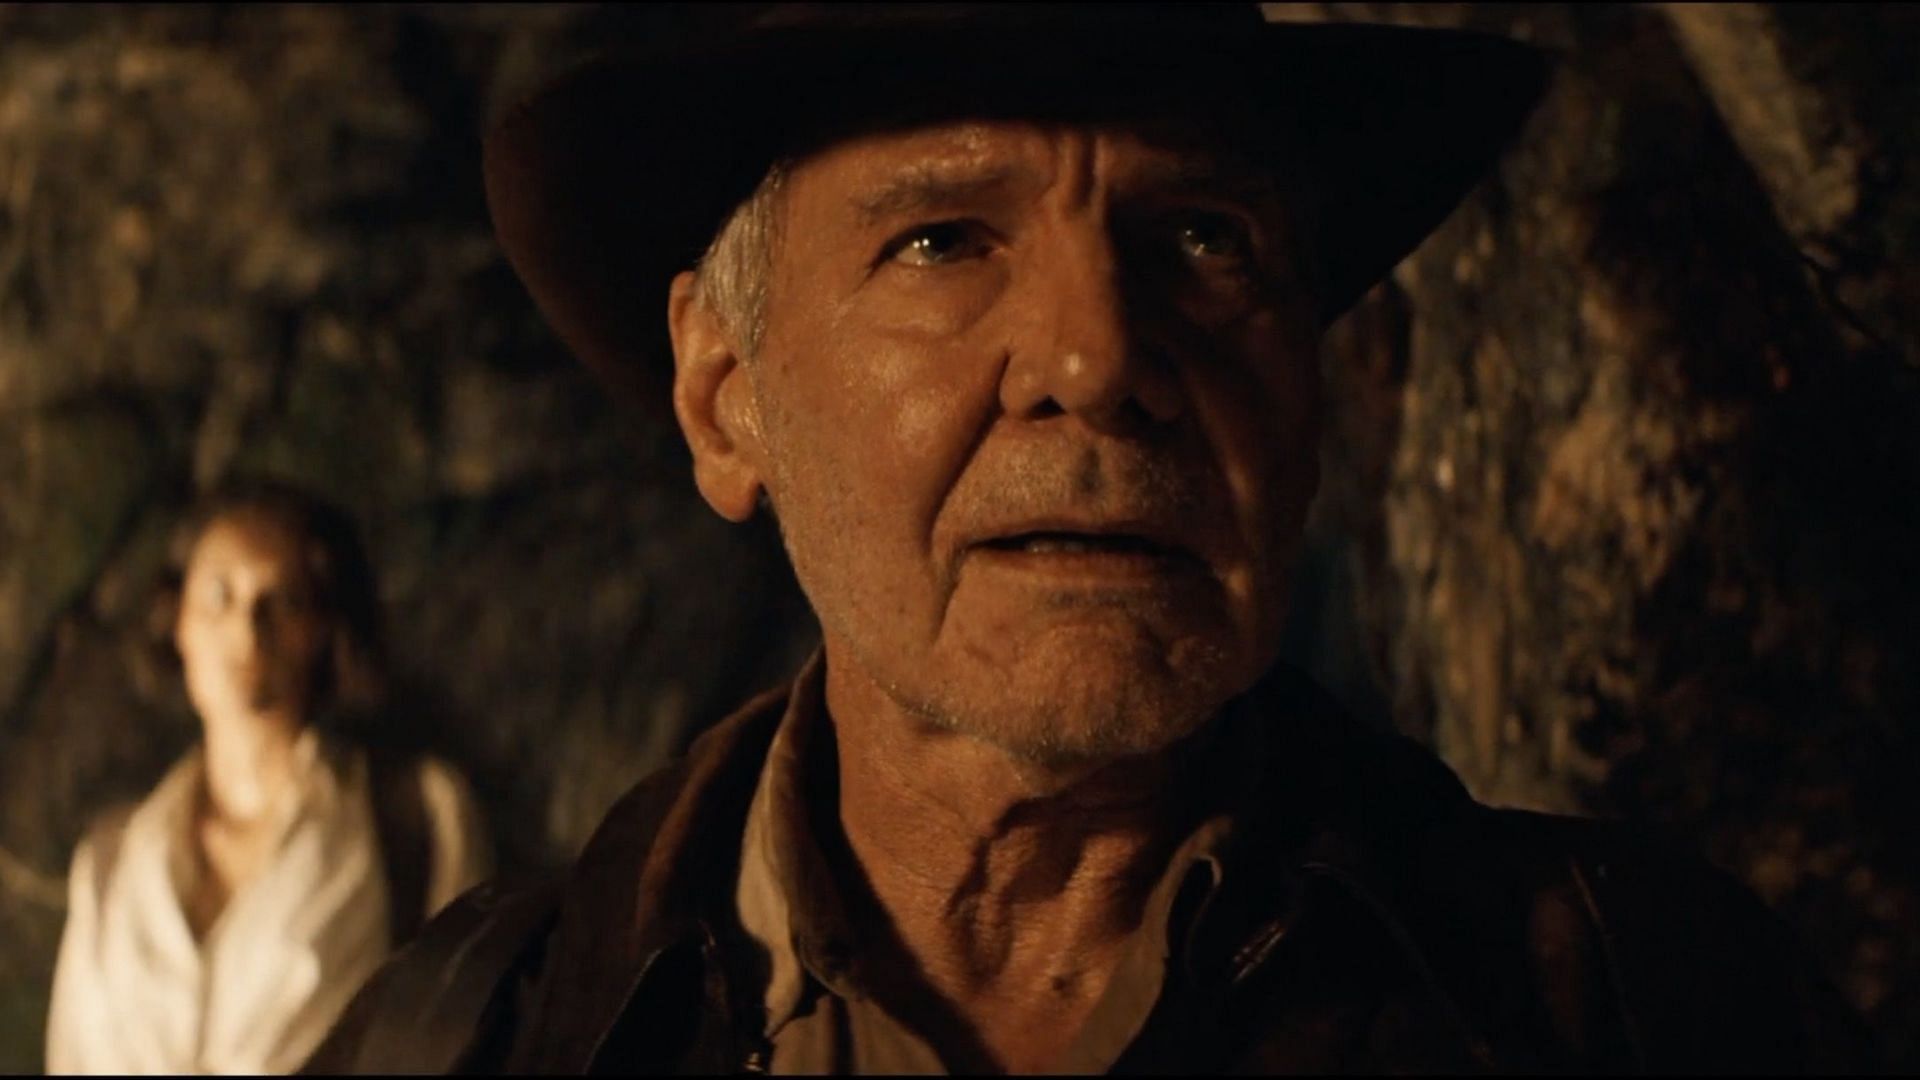 Harrison Ford as Indian Jones in the Indiana Jones franchise!